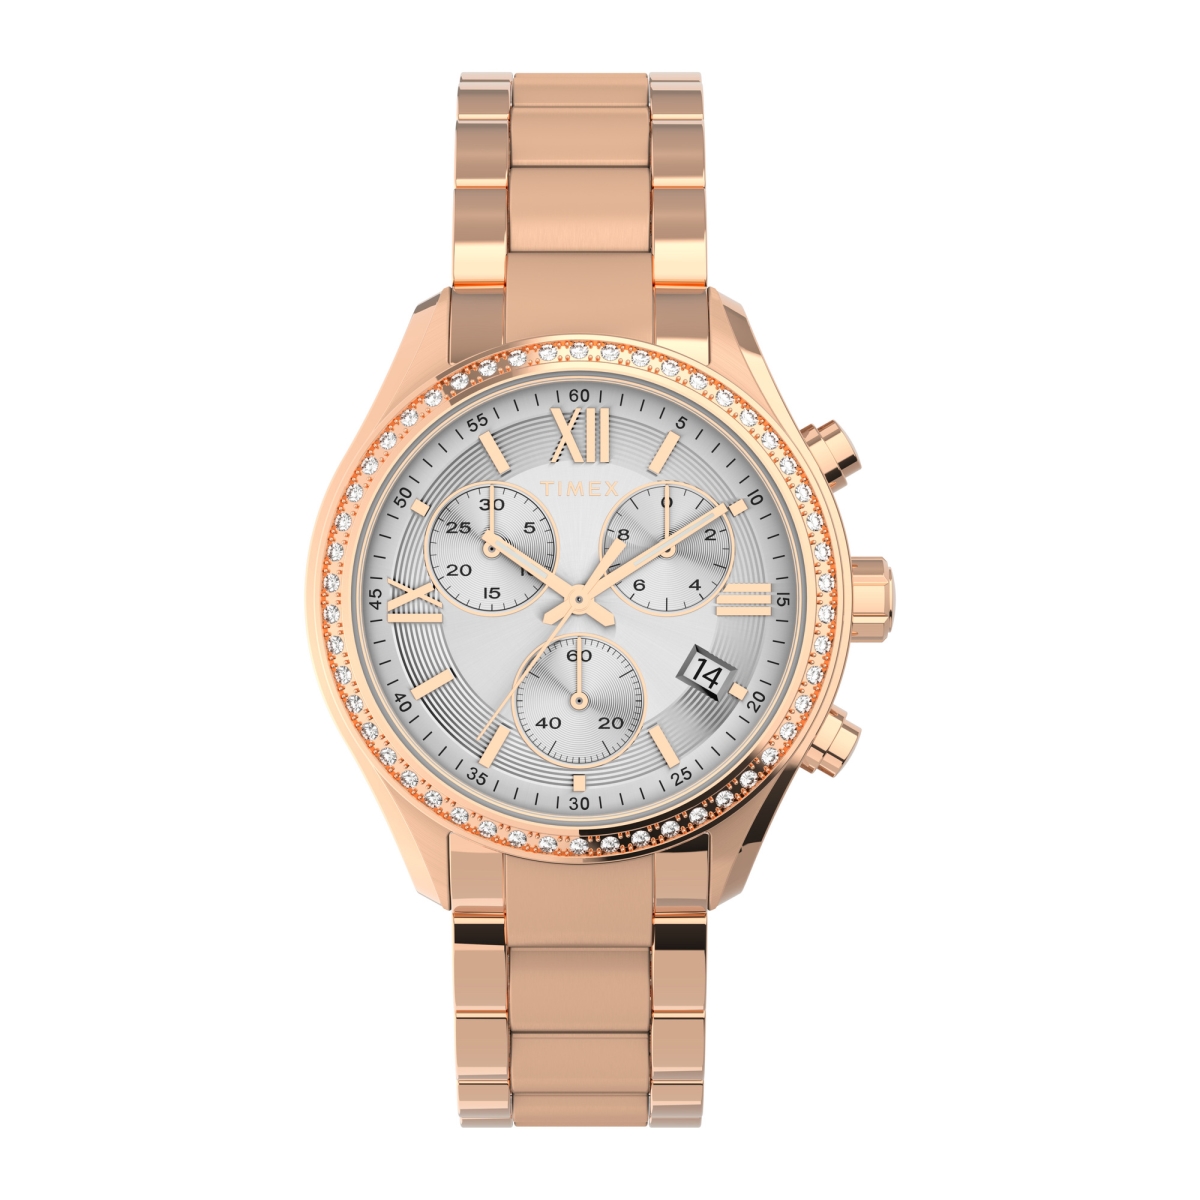 38 mm Womens Standard Chronograph Watch, Rose-Gold & Silver -  The Gem Collection, TH3246471